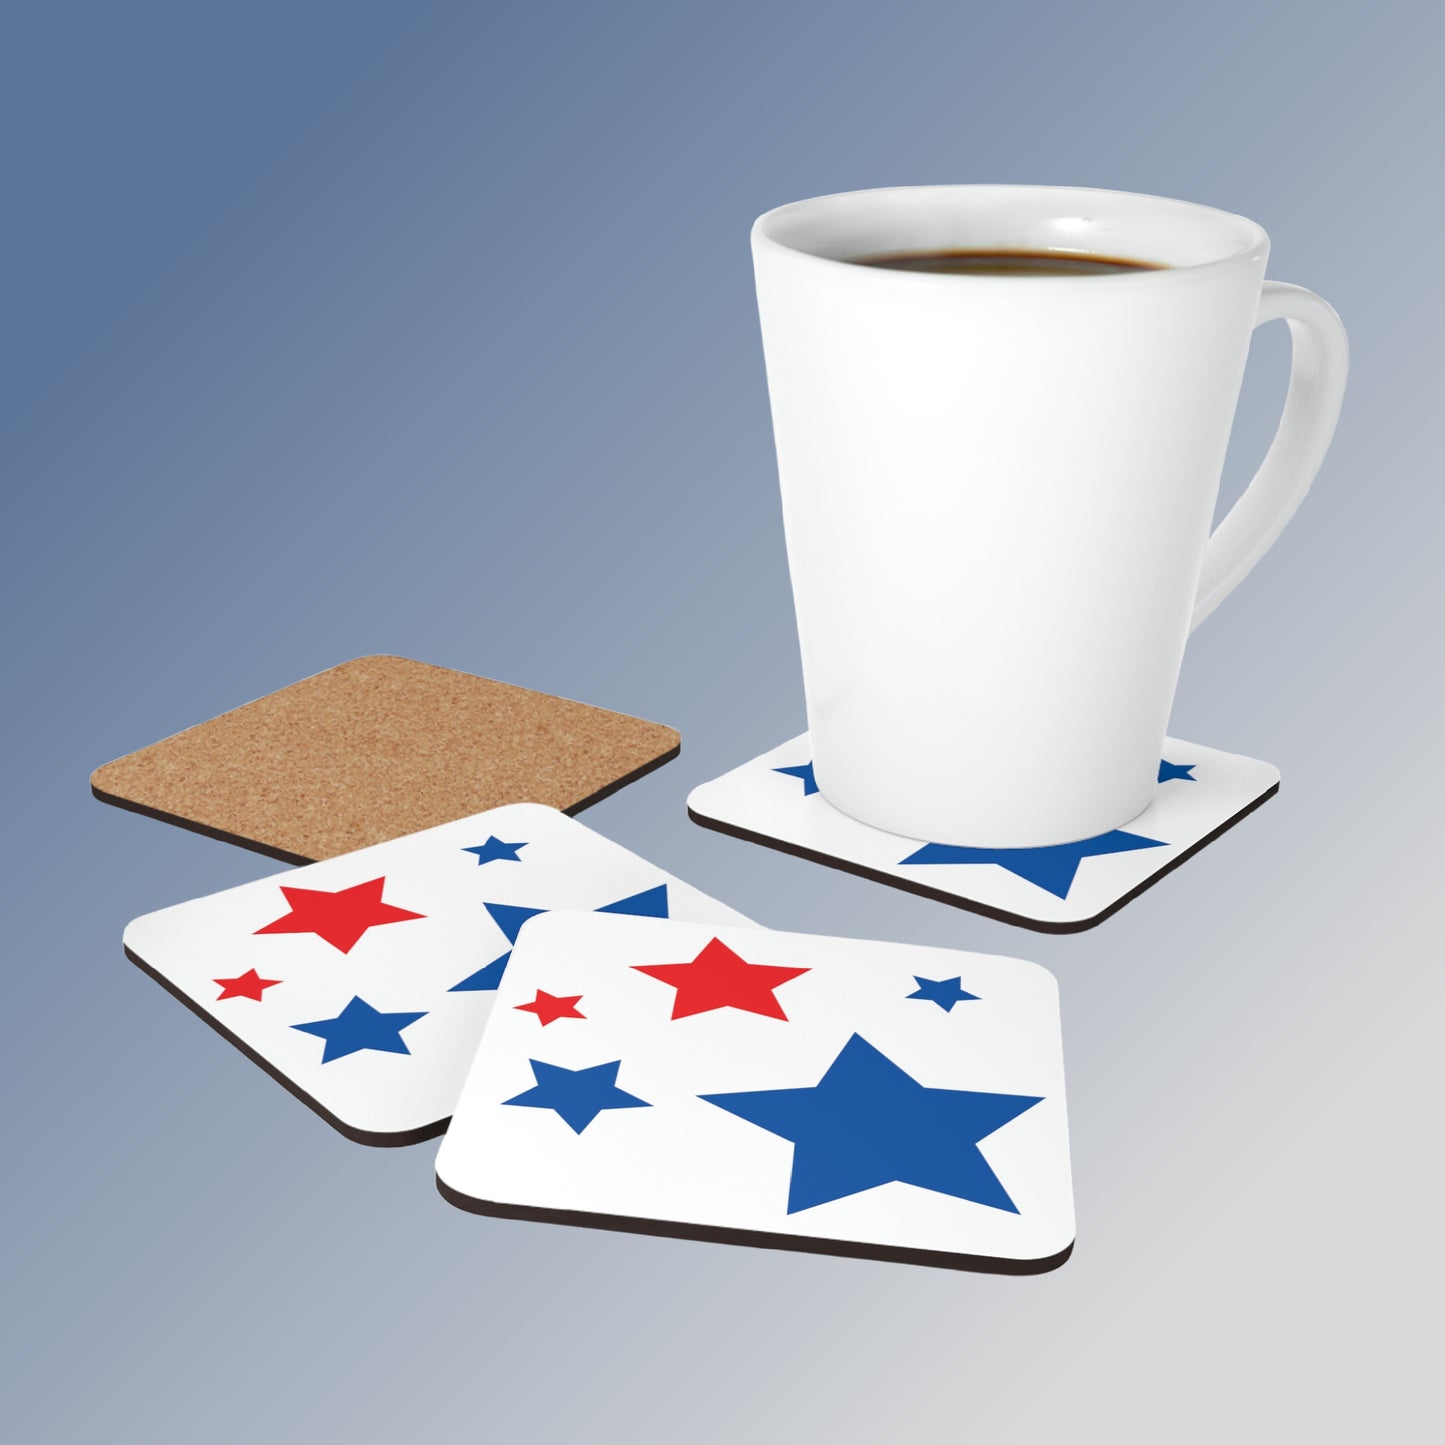 Mock up of the 4 coasters with a white latte mug